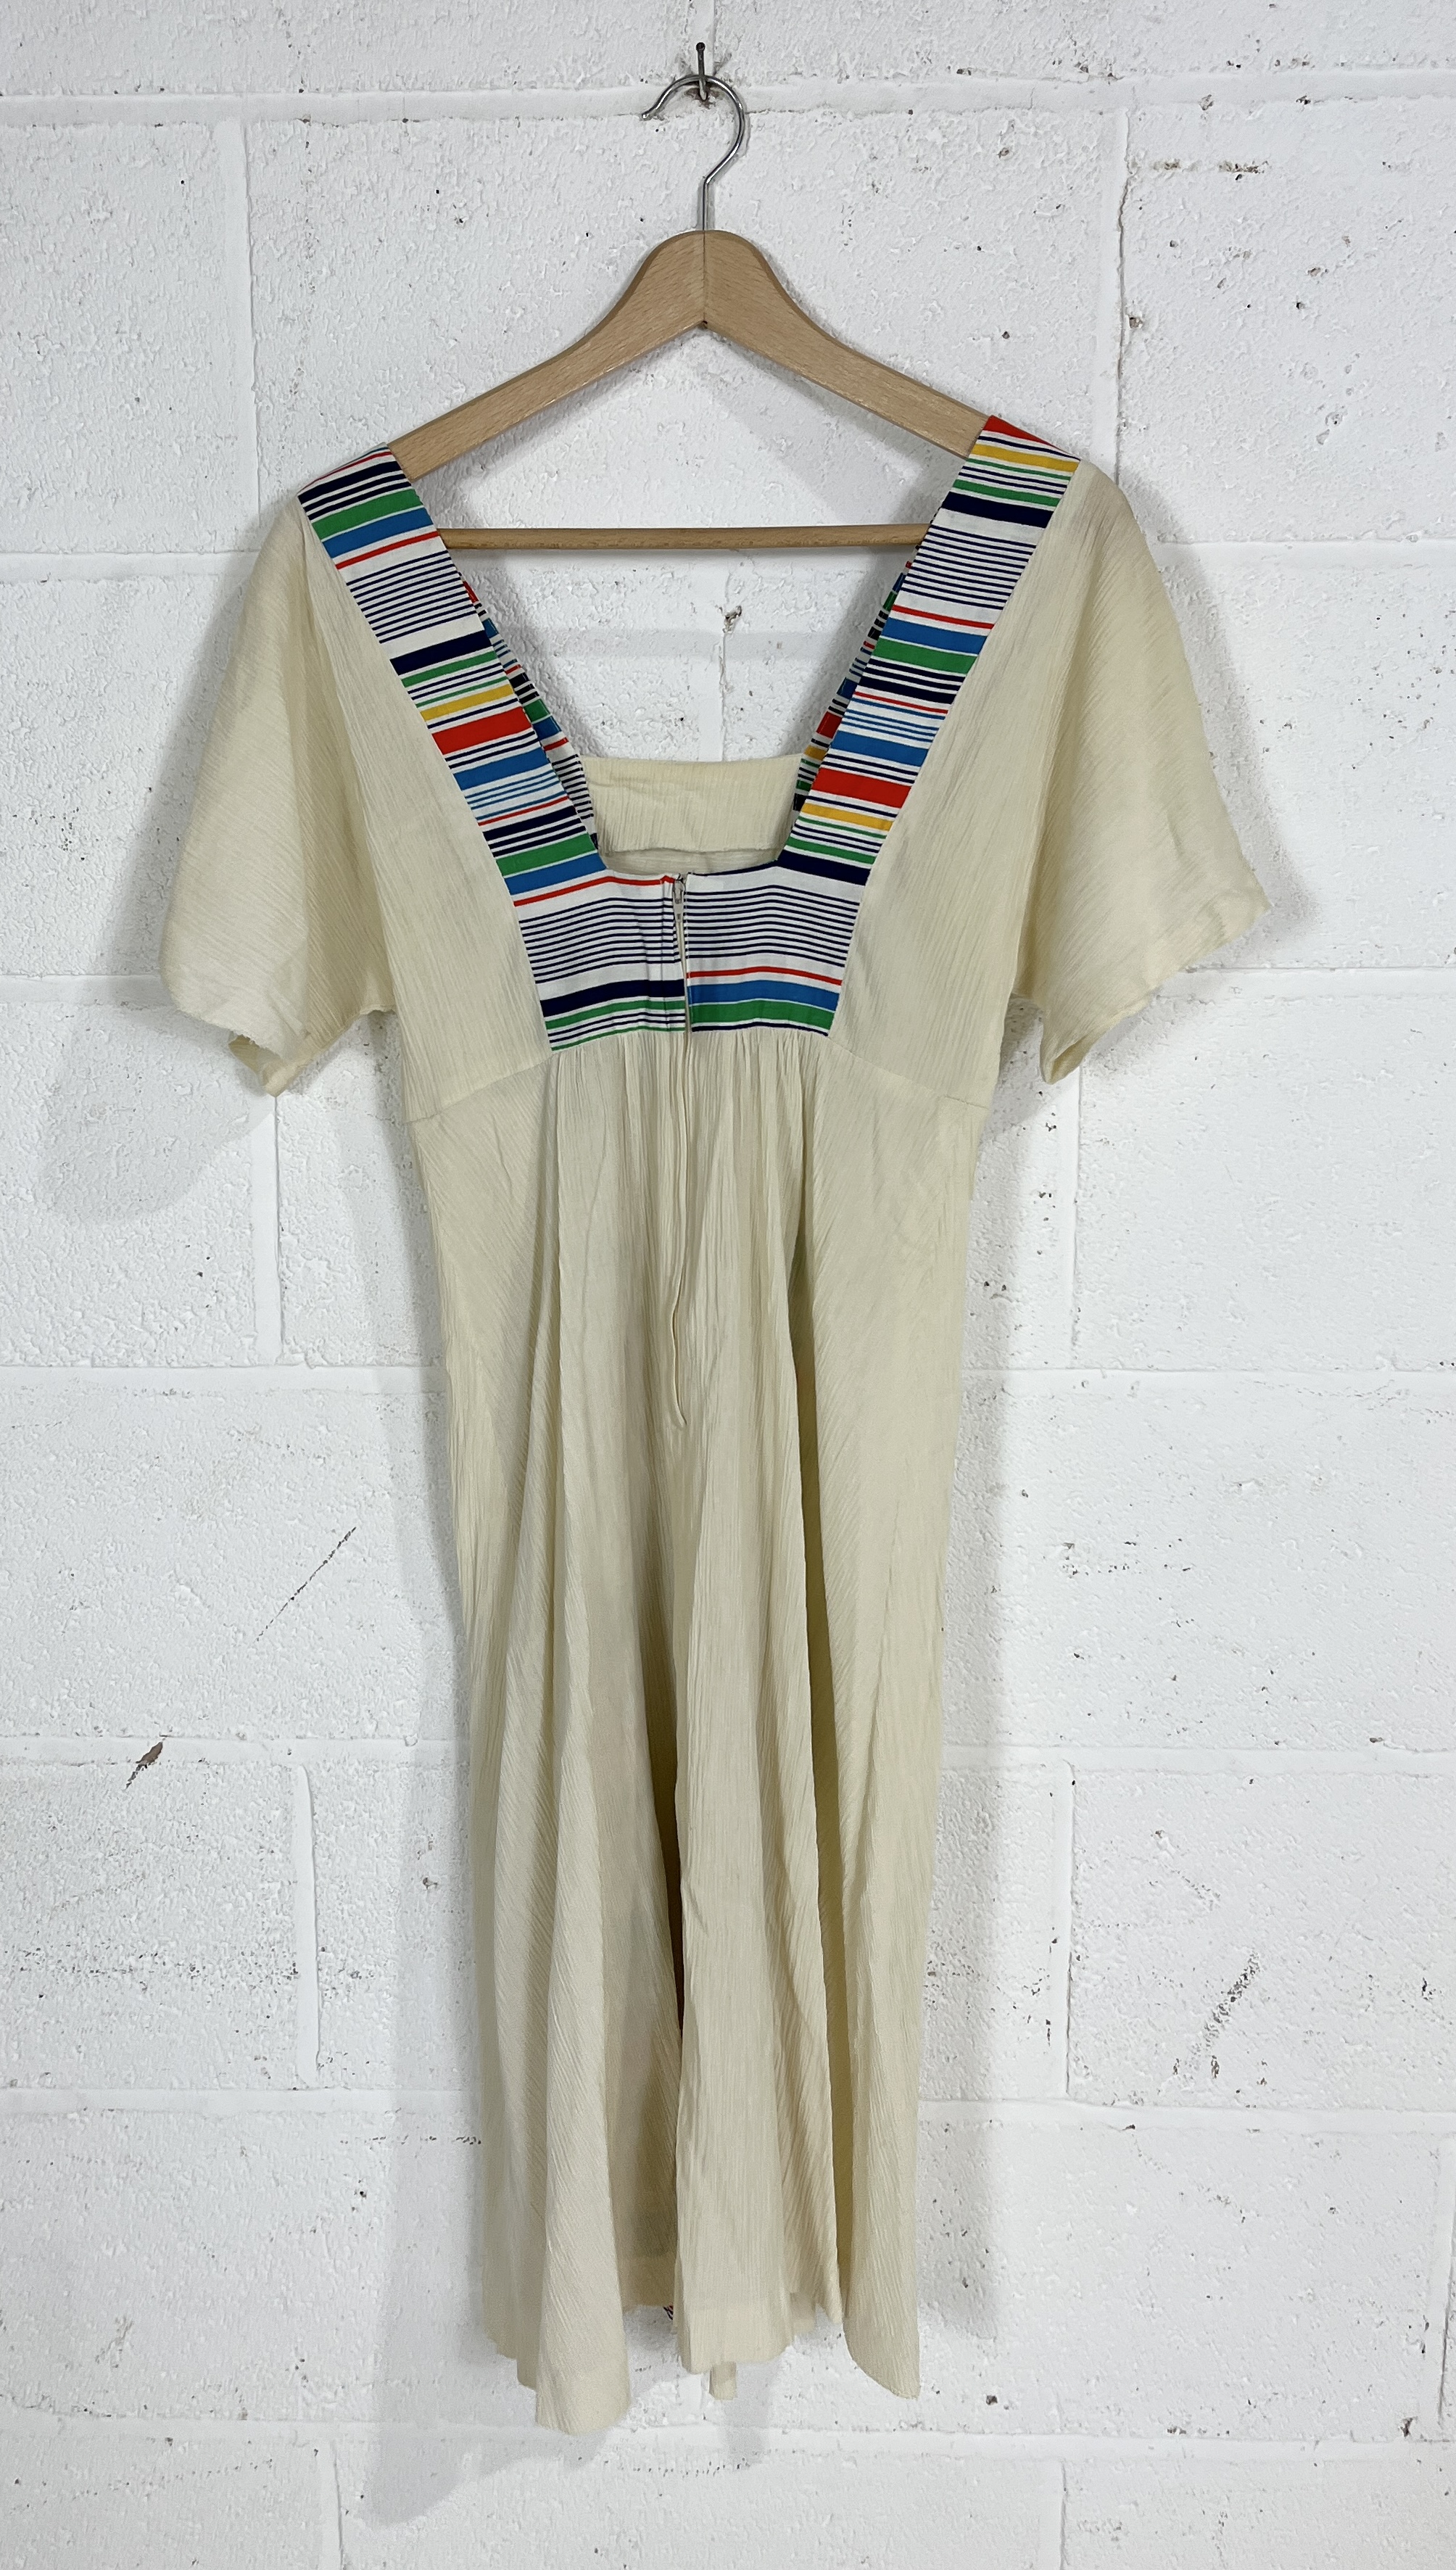 Three vintage 1970's full length dresses including an Earlybird prairie dress, Mister Ant striped - Image 8 of 12